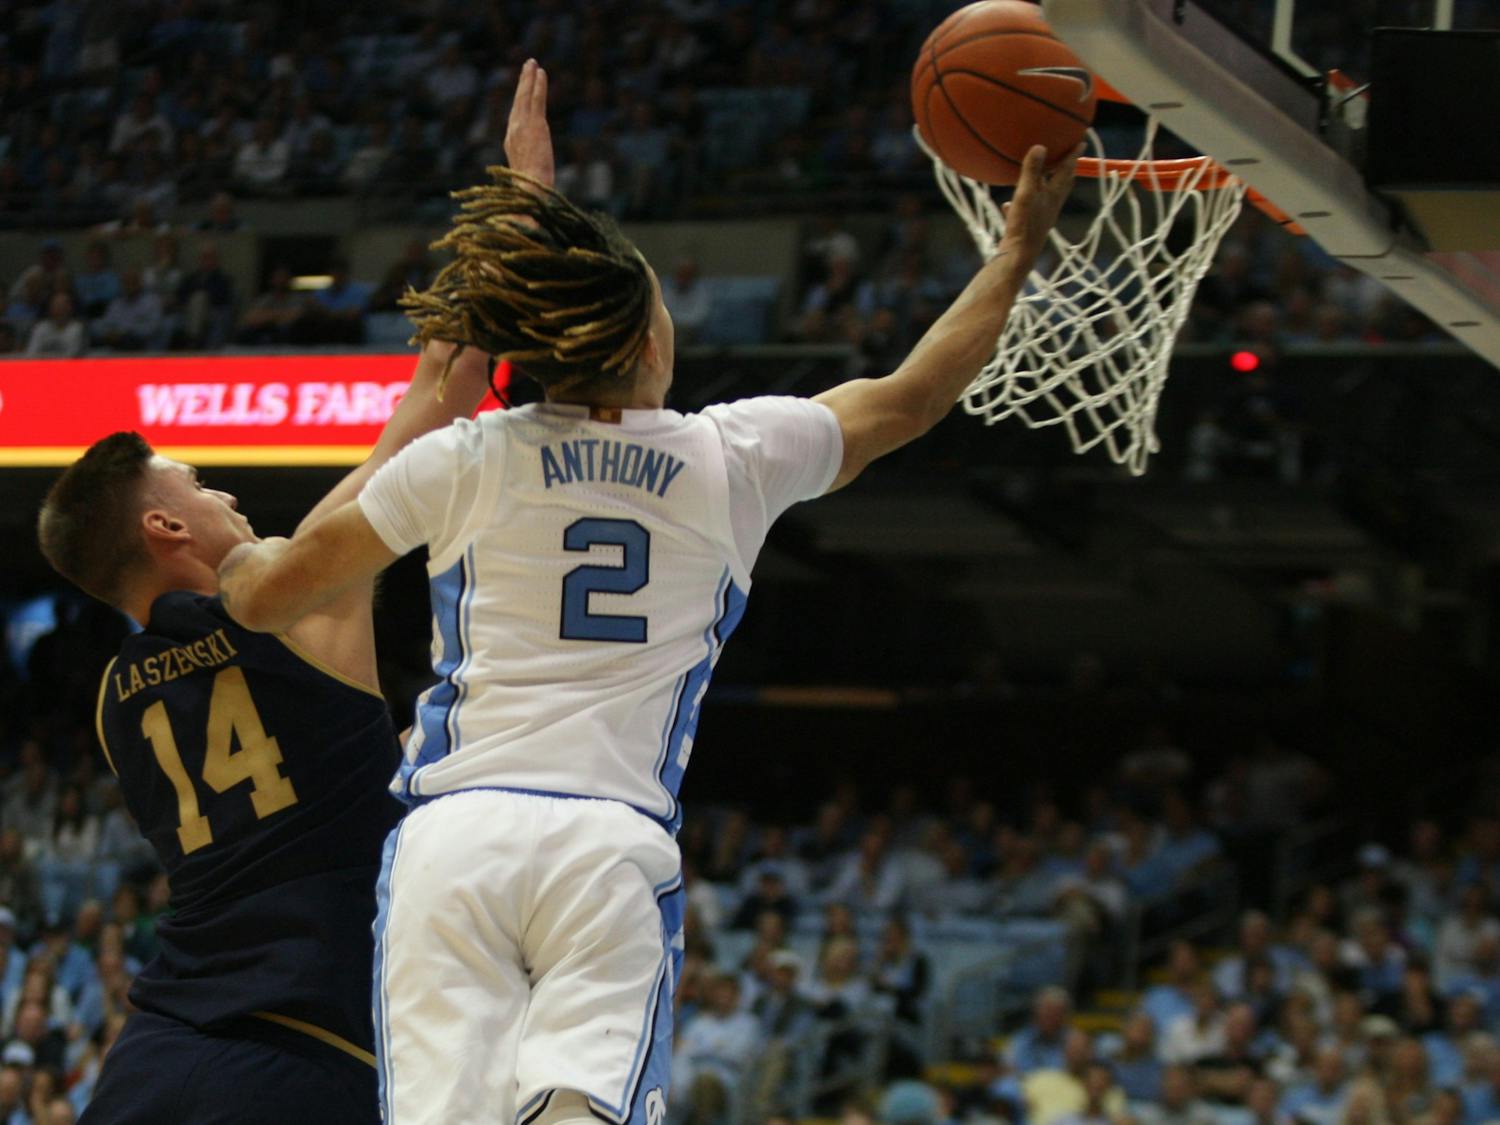 UNC guard Cole Anthony (2) drives by Notre Dame defender Nate Laszewski (14) for the layup on Wednesday, Nov. 6, 2019 in the Dean E. Smith Center. Anthony finished the game with 34 points and 11 rebounds. The Tar Heels beat the Fighting Irish 76-65.